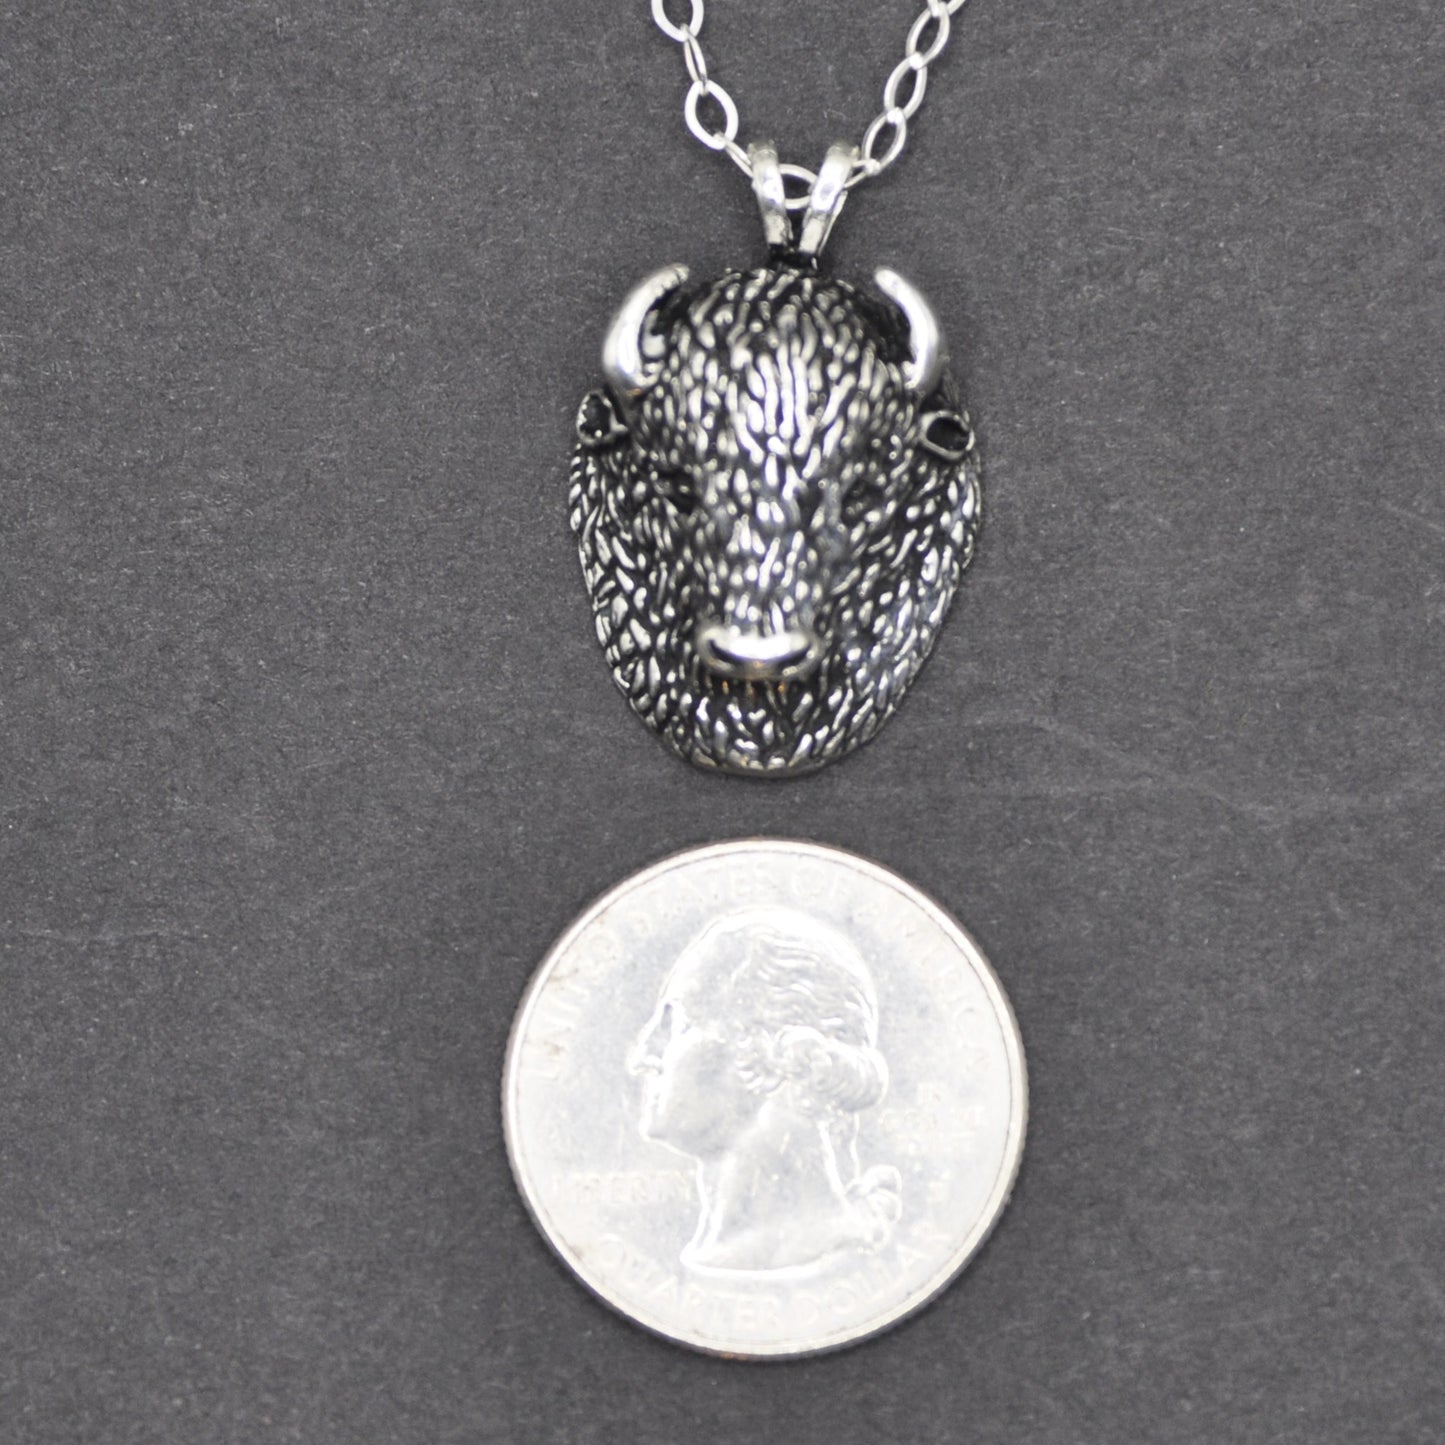 Buffalo Bison Pendant Recycled Sterling Silver .925 18 Inch Cable Chain Endangered Species